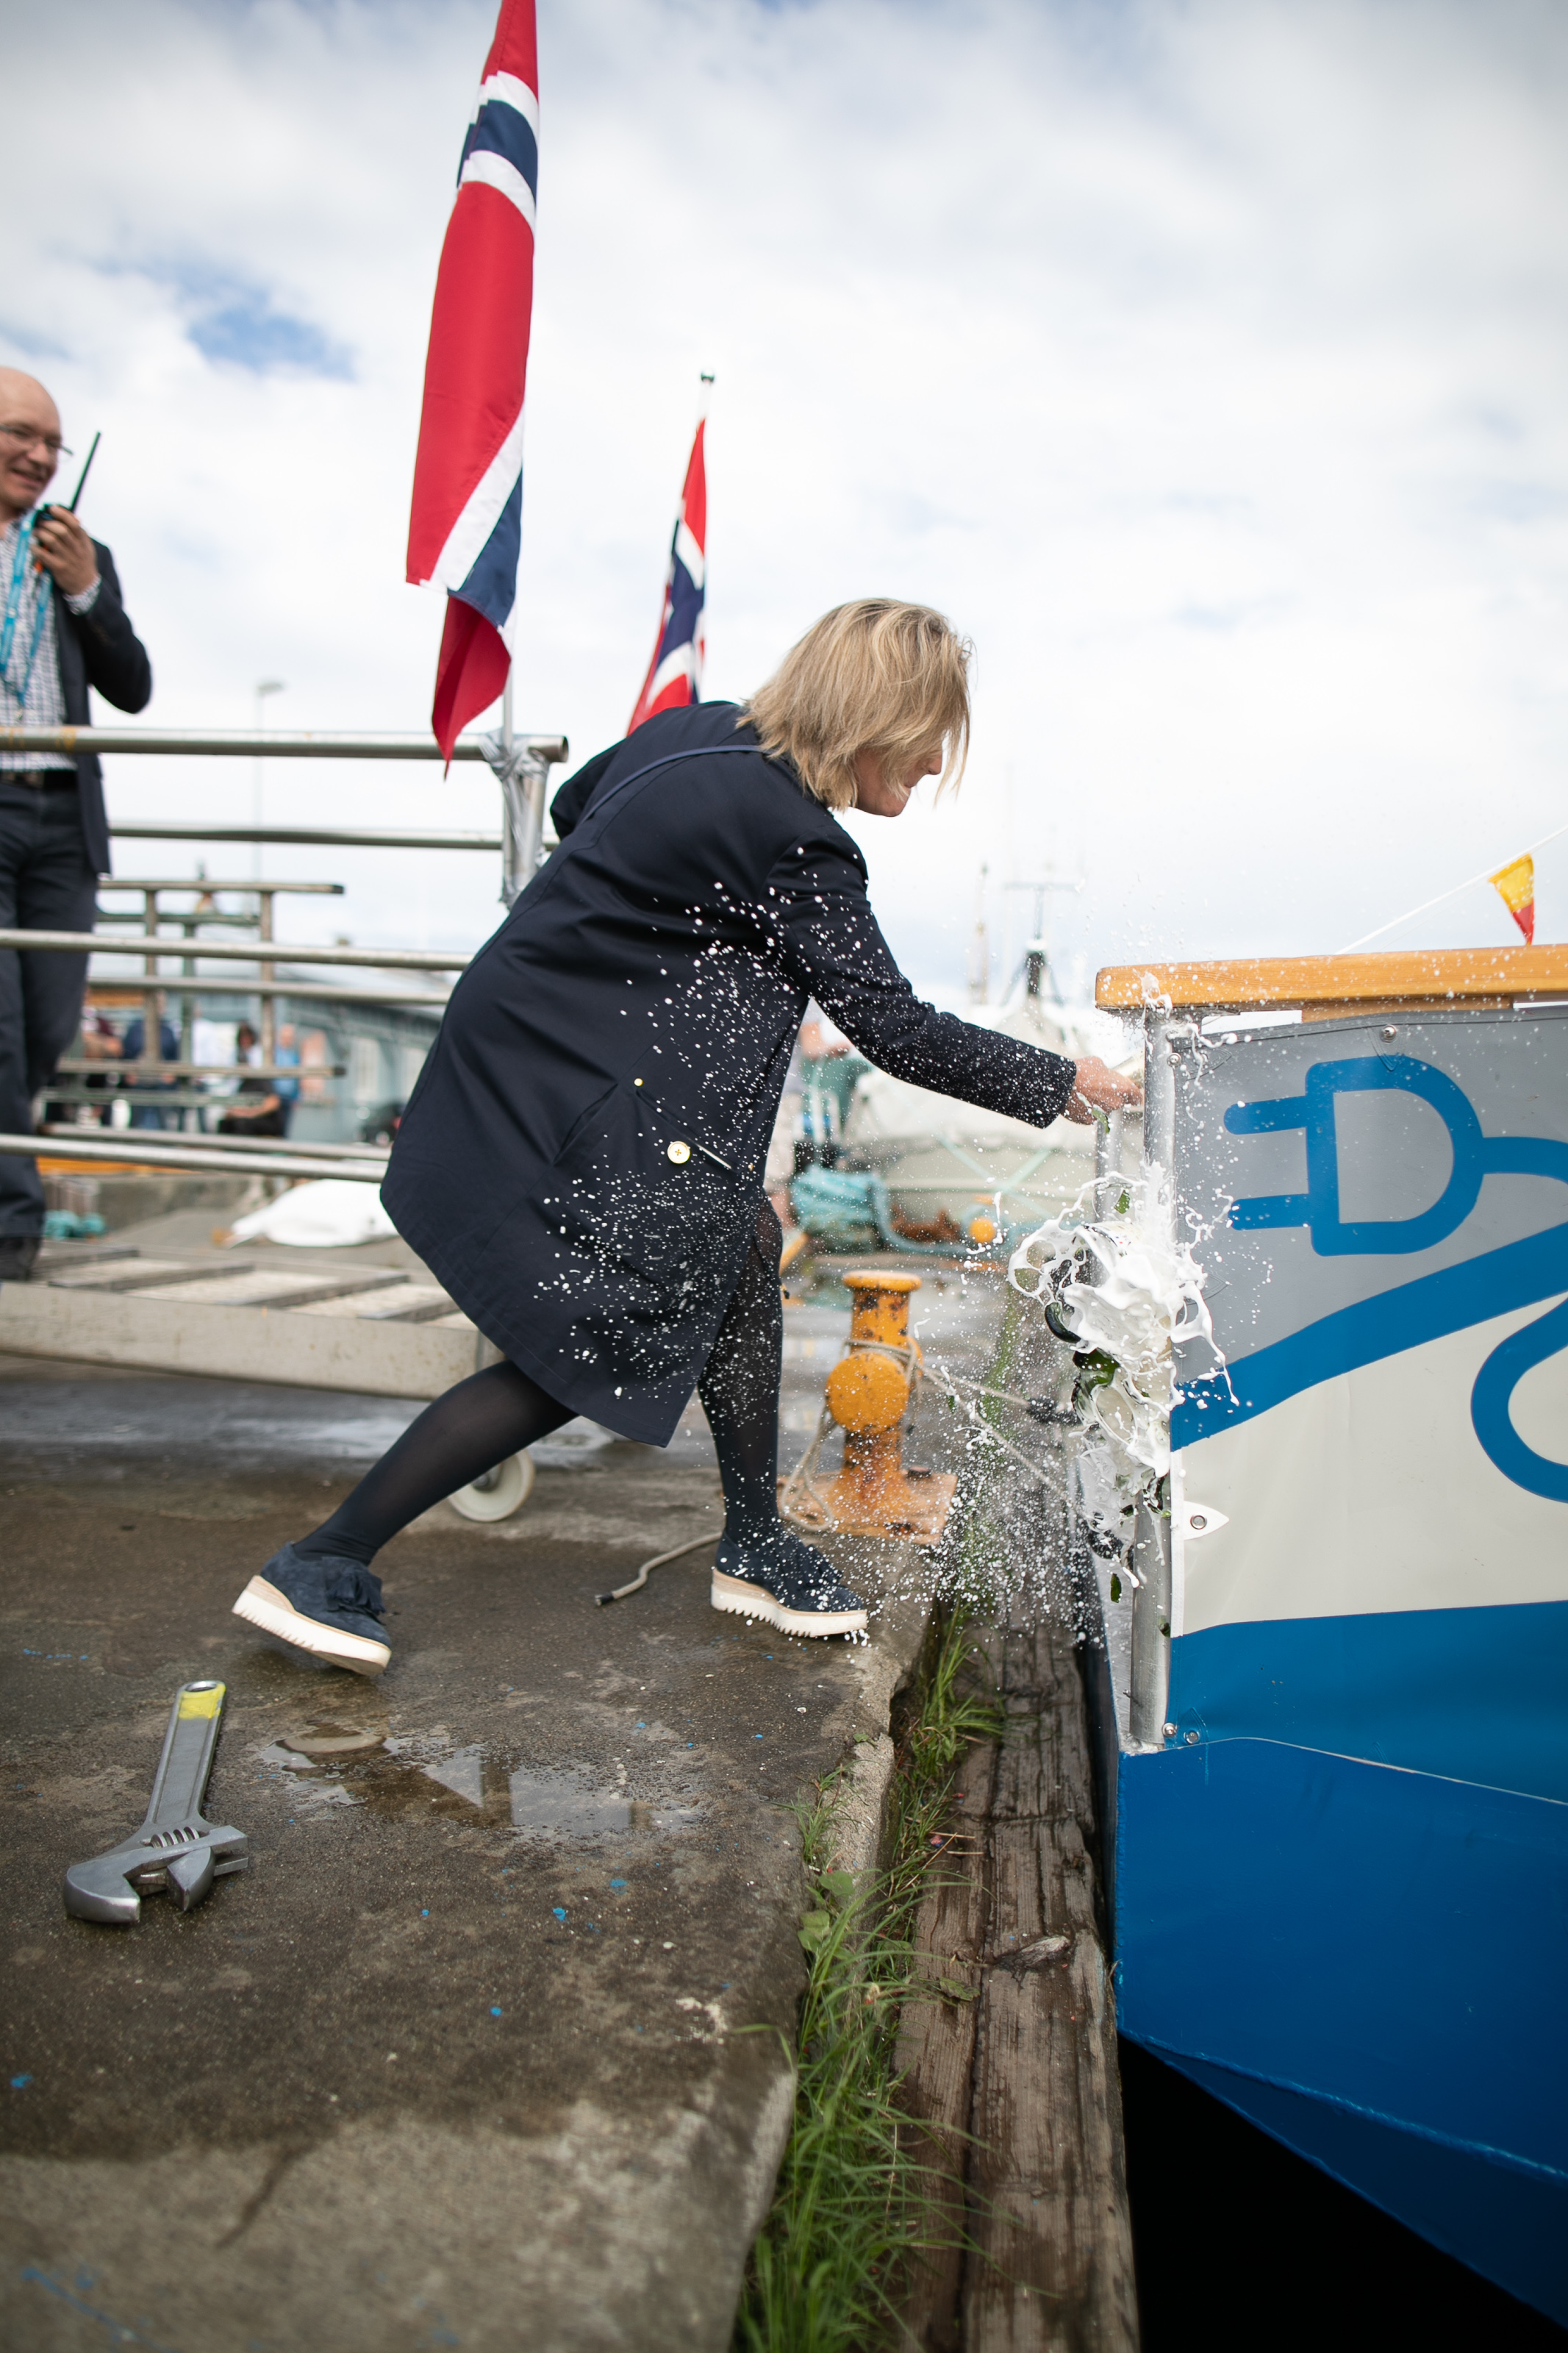 The ferry's godmother, Ingrid Schjølberg performs the christening by the traditional breaking of a bottle of champagne.